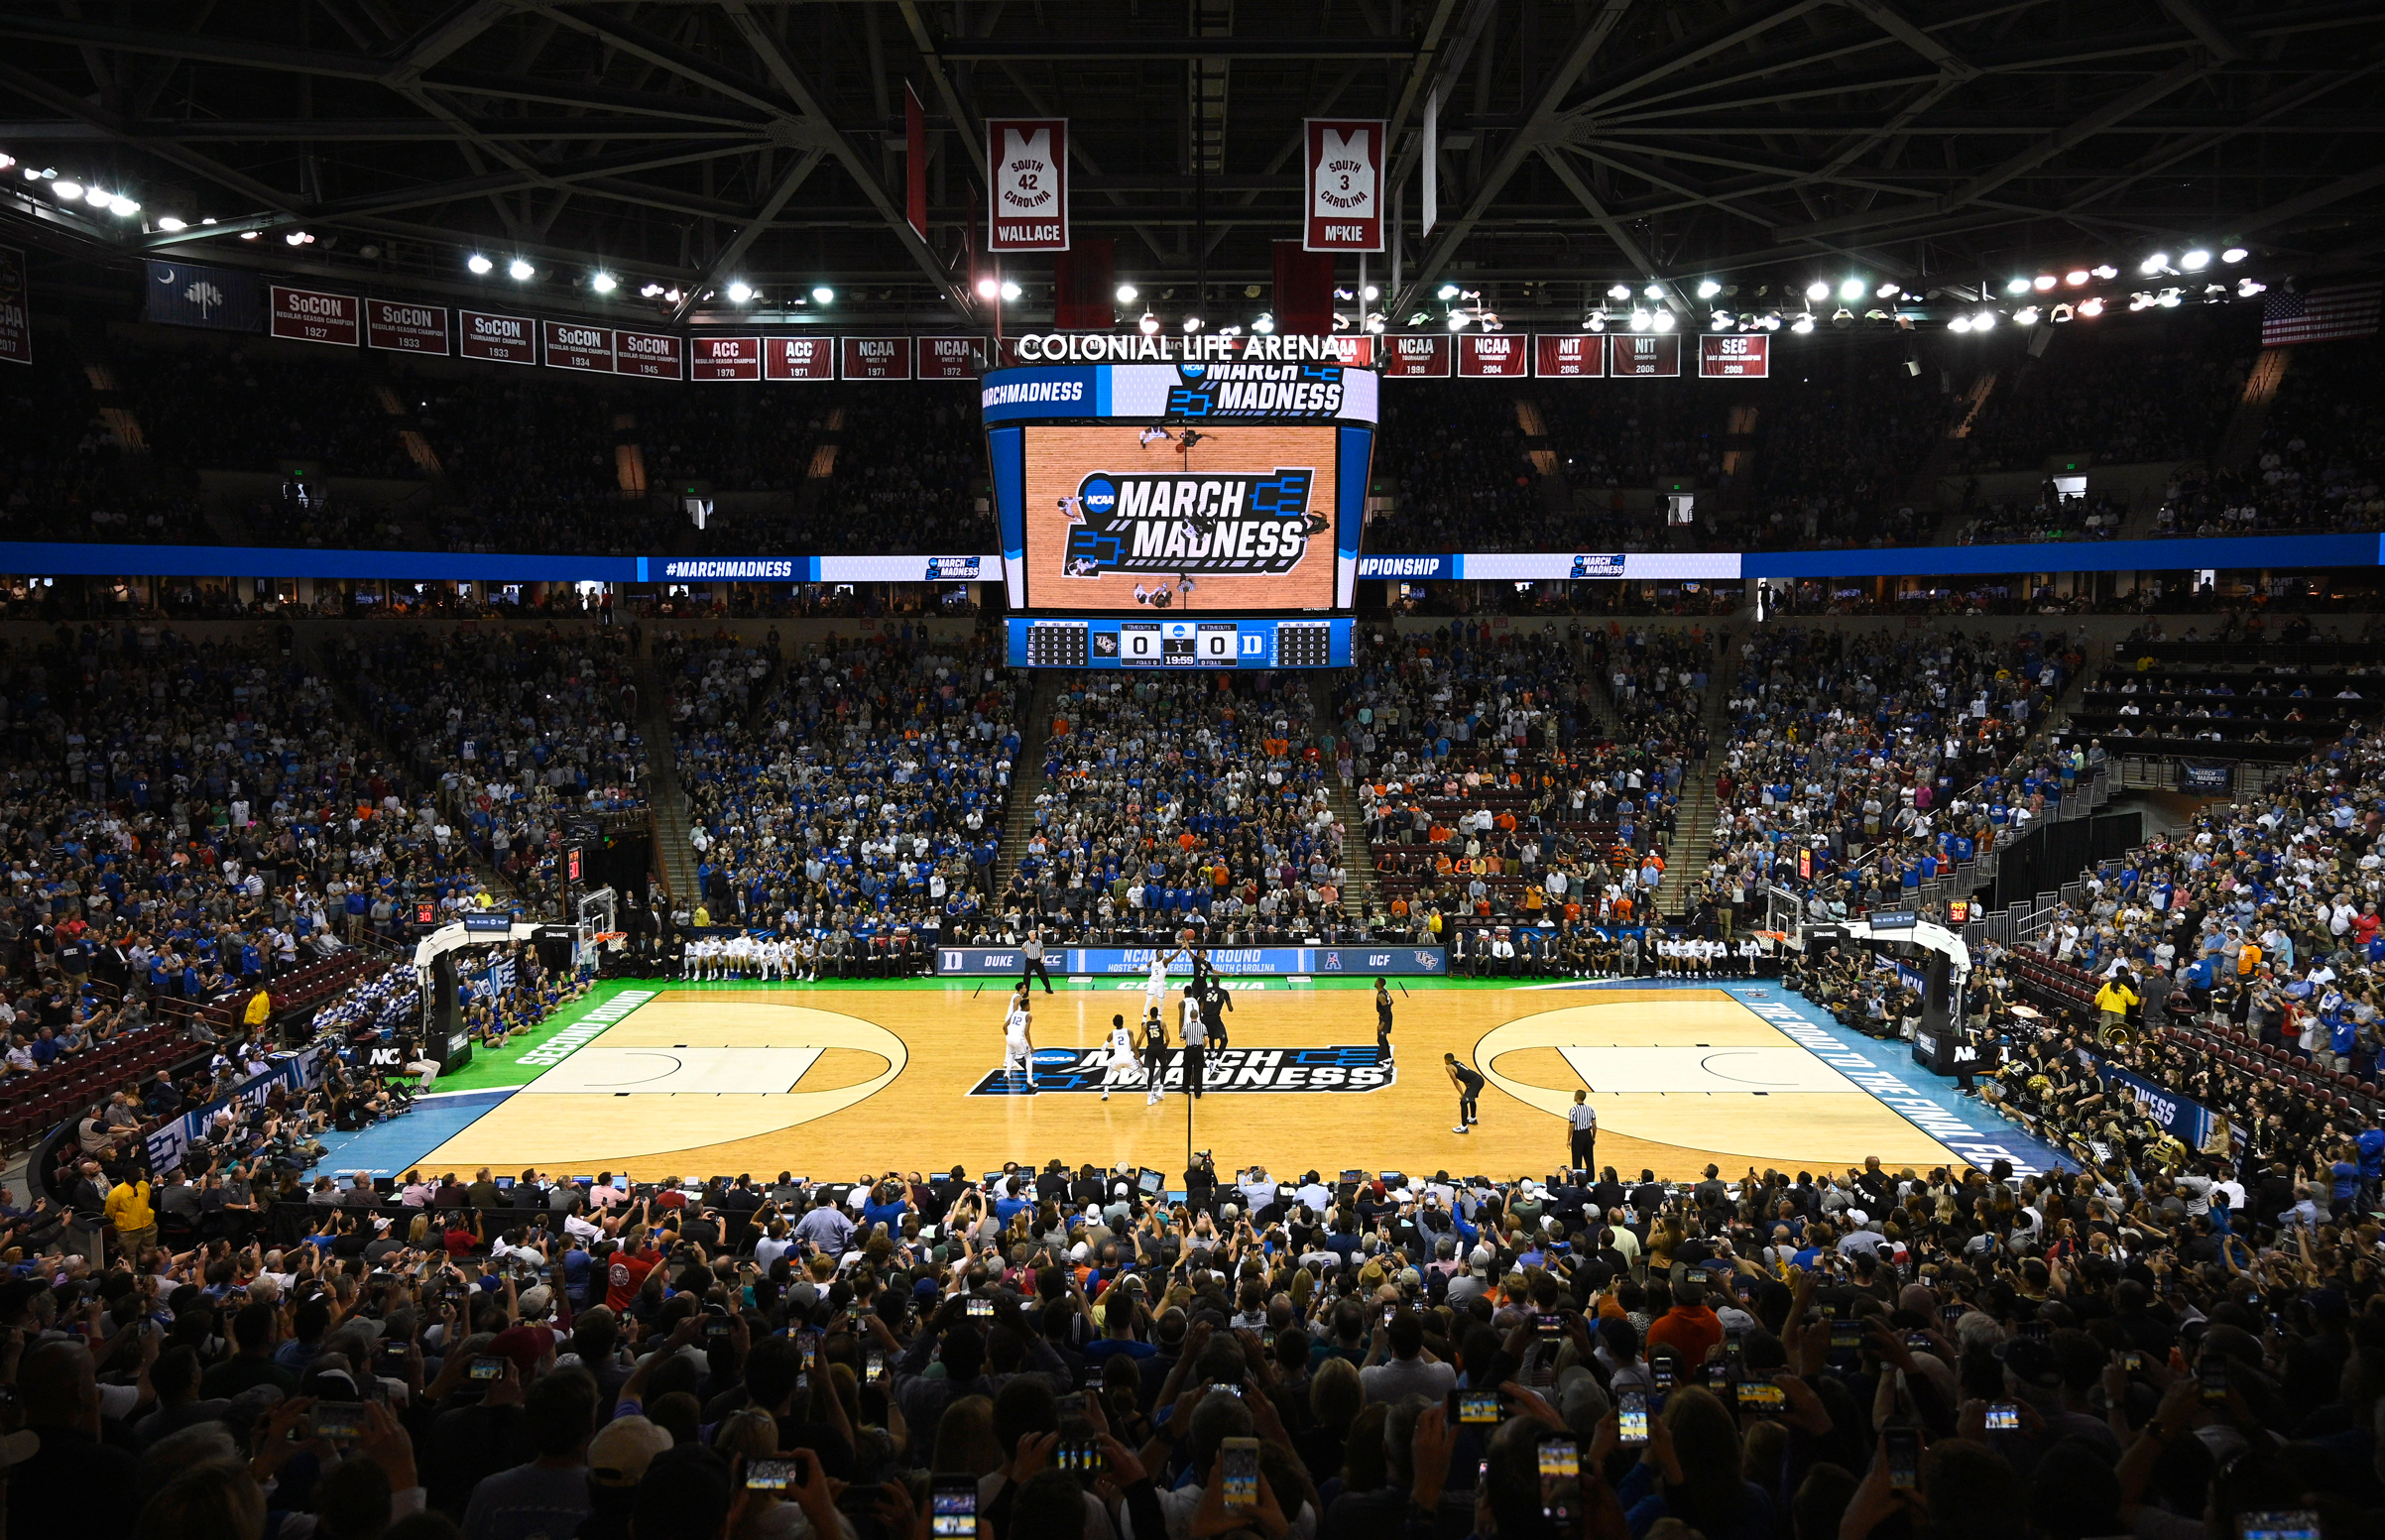 The game between the Duke Blue Devils and the University of Central Florida Knights tips off in the second round of the 2019 NCAA Men's Basketball Tournament on March 24, 2019 in Columbia, South Carolina. (John Joyner—NCAA Photos/Getty Images)